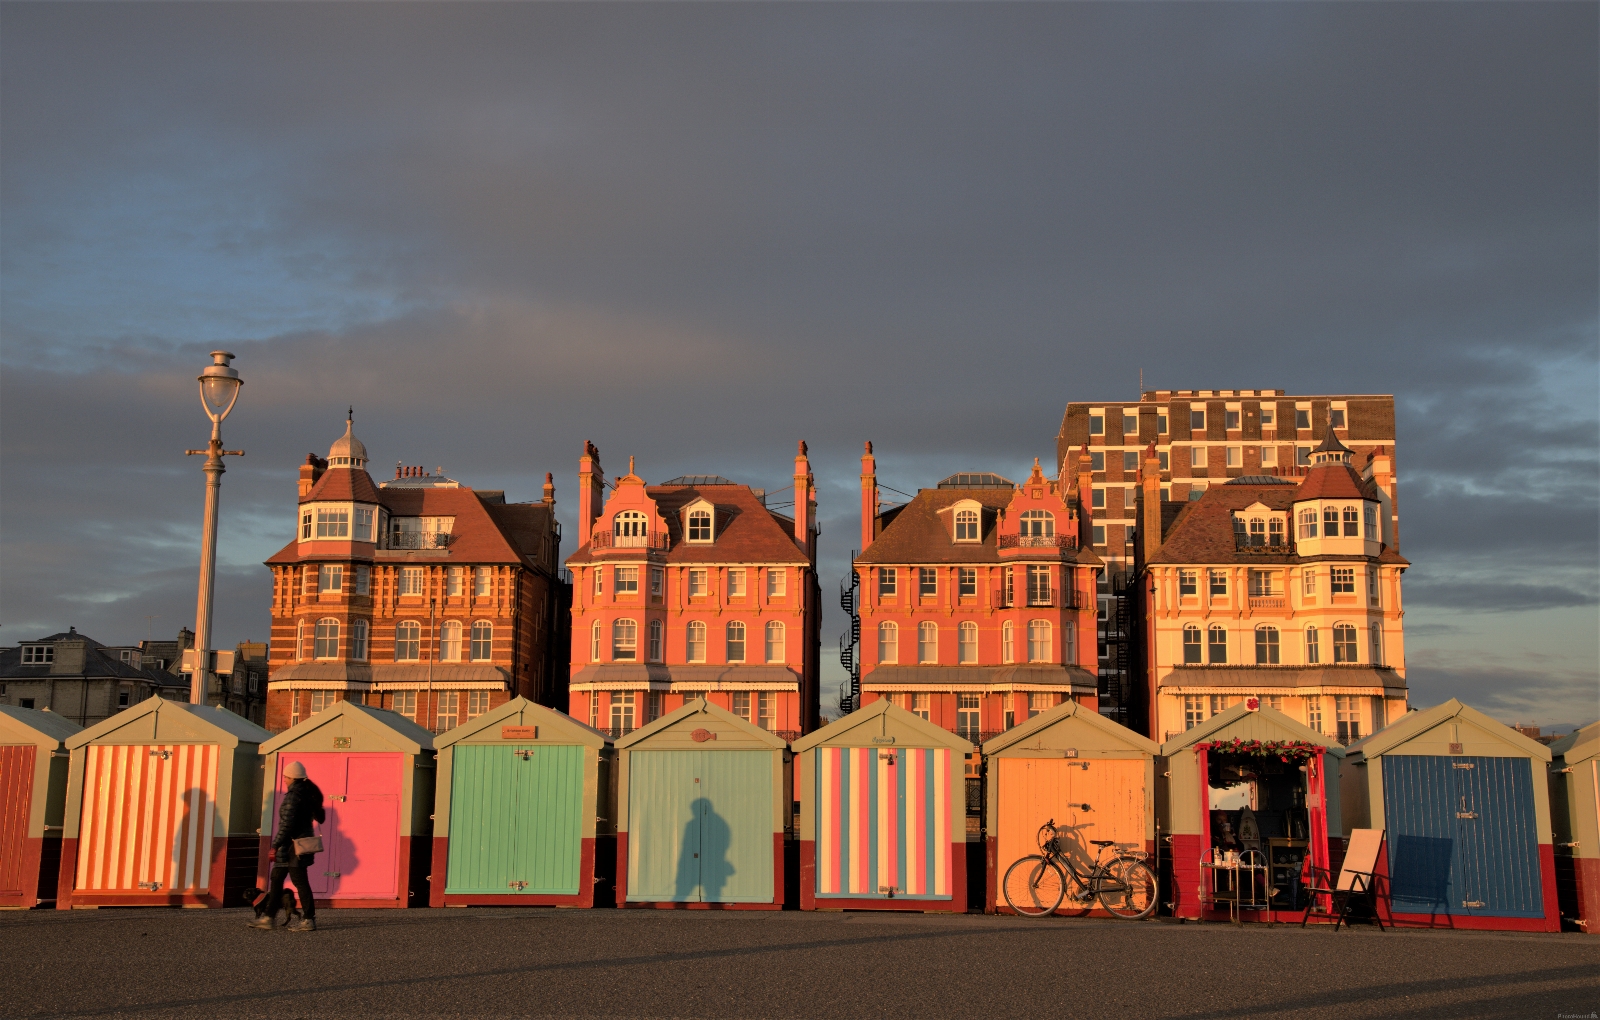 Image of Beach huts in Hove by michael bennett